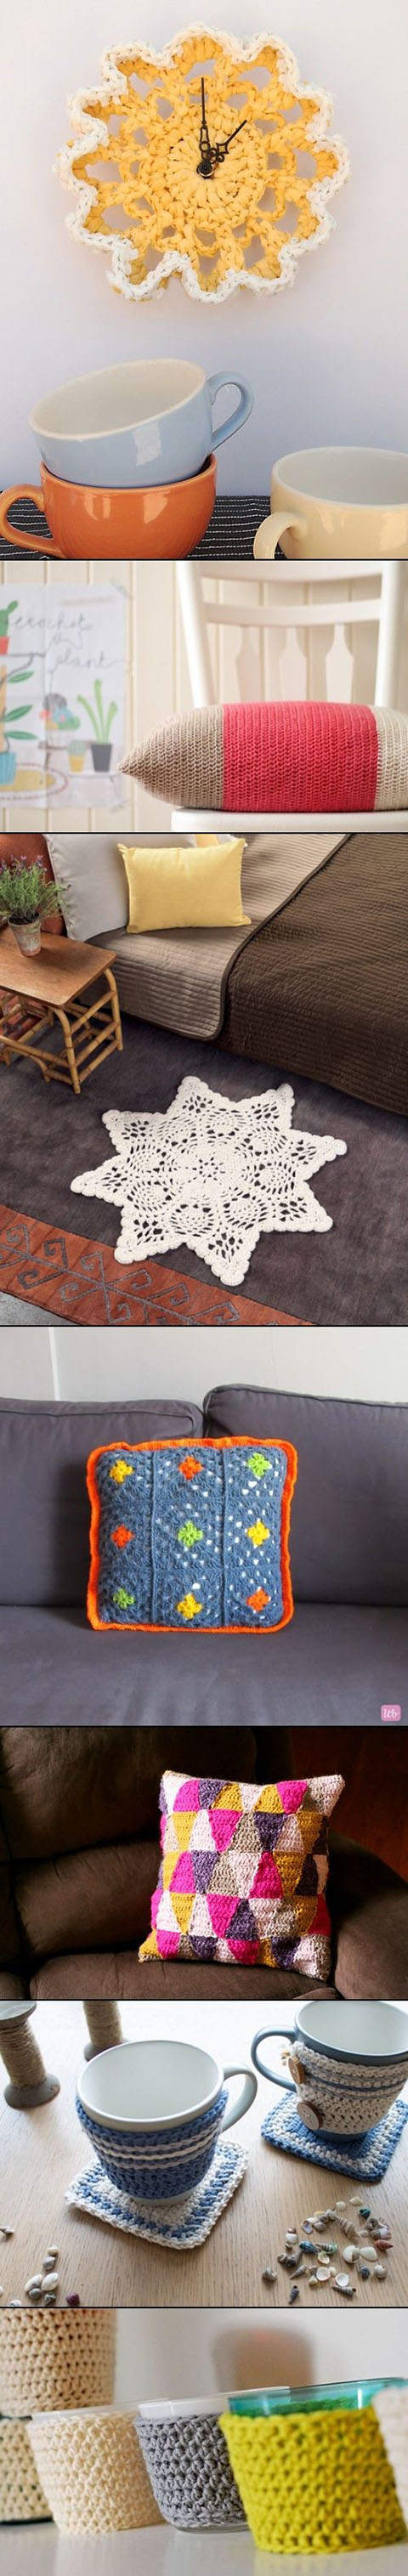 DIY Crochet and knitted Crafts11